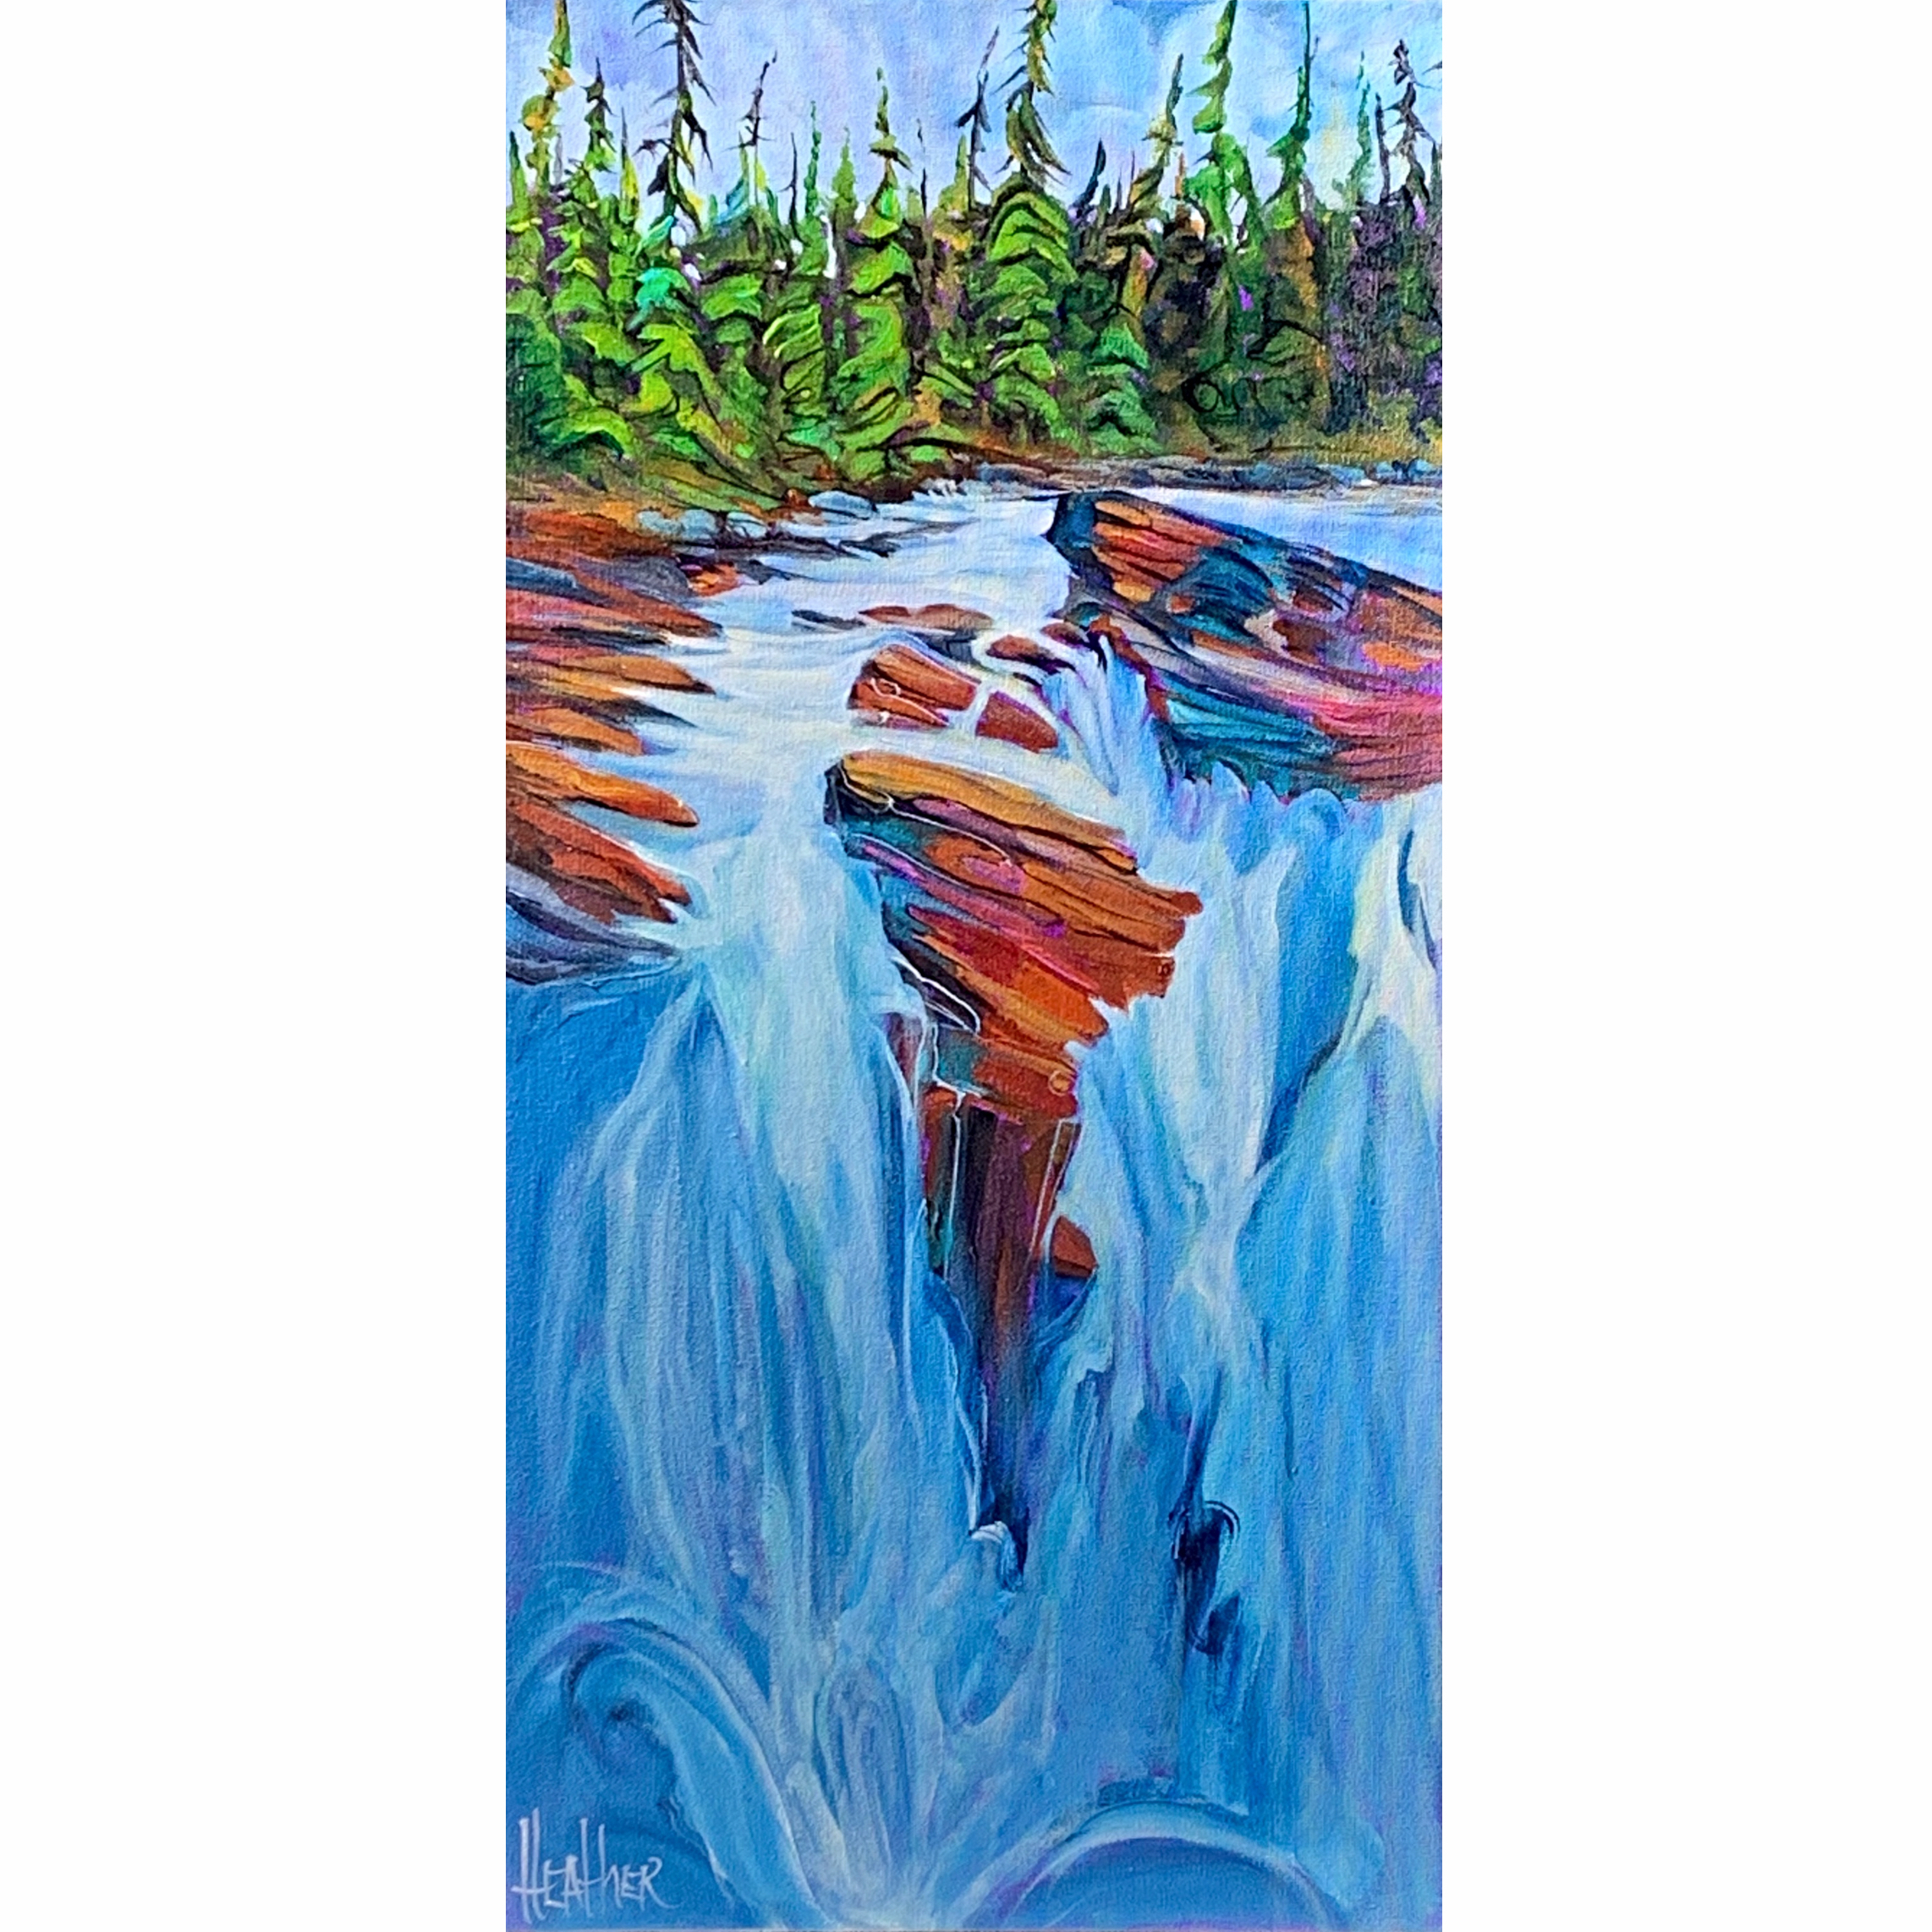 Overflowing Heart, acrylic waterfall painting by Heather Pant | Effusion Art Gallery + Cast Glass Studio, Invermere BC